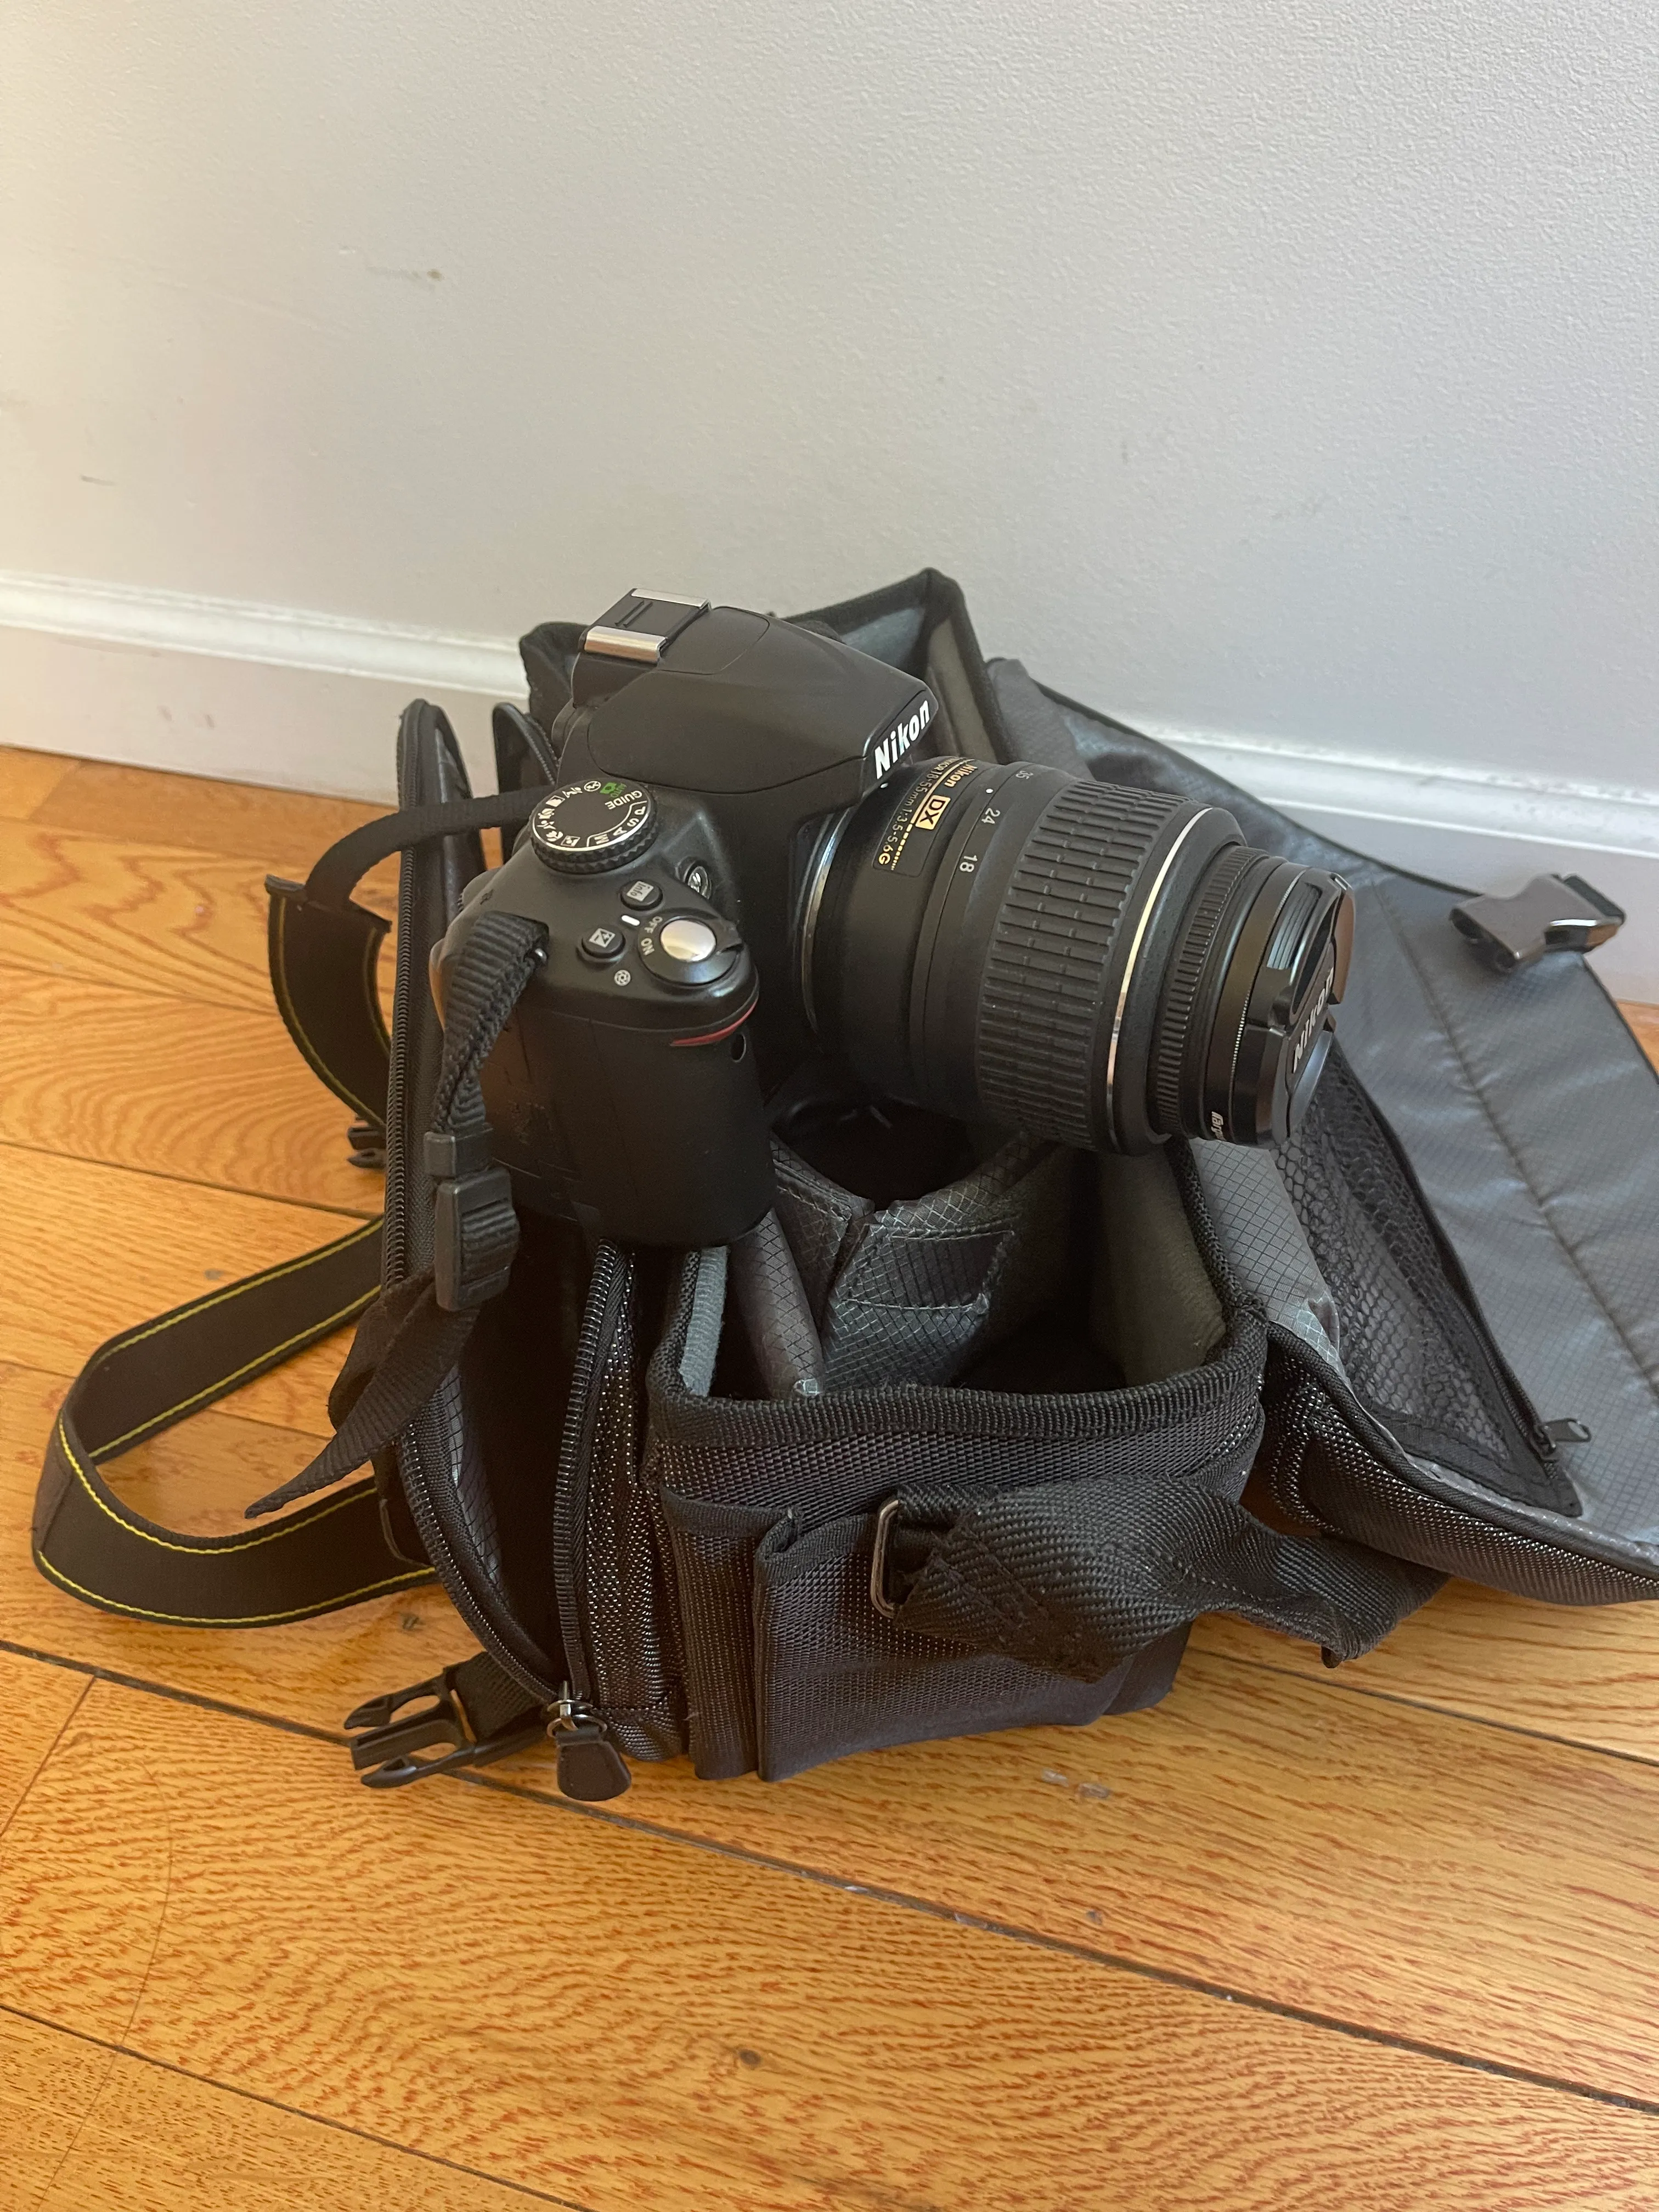 Nikon D3000 DSLR Camera and Accessories, missing battery media